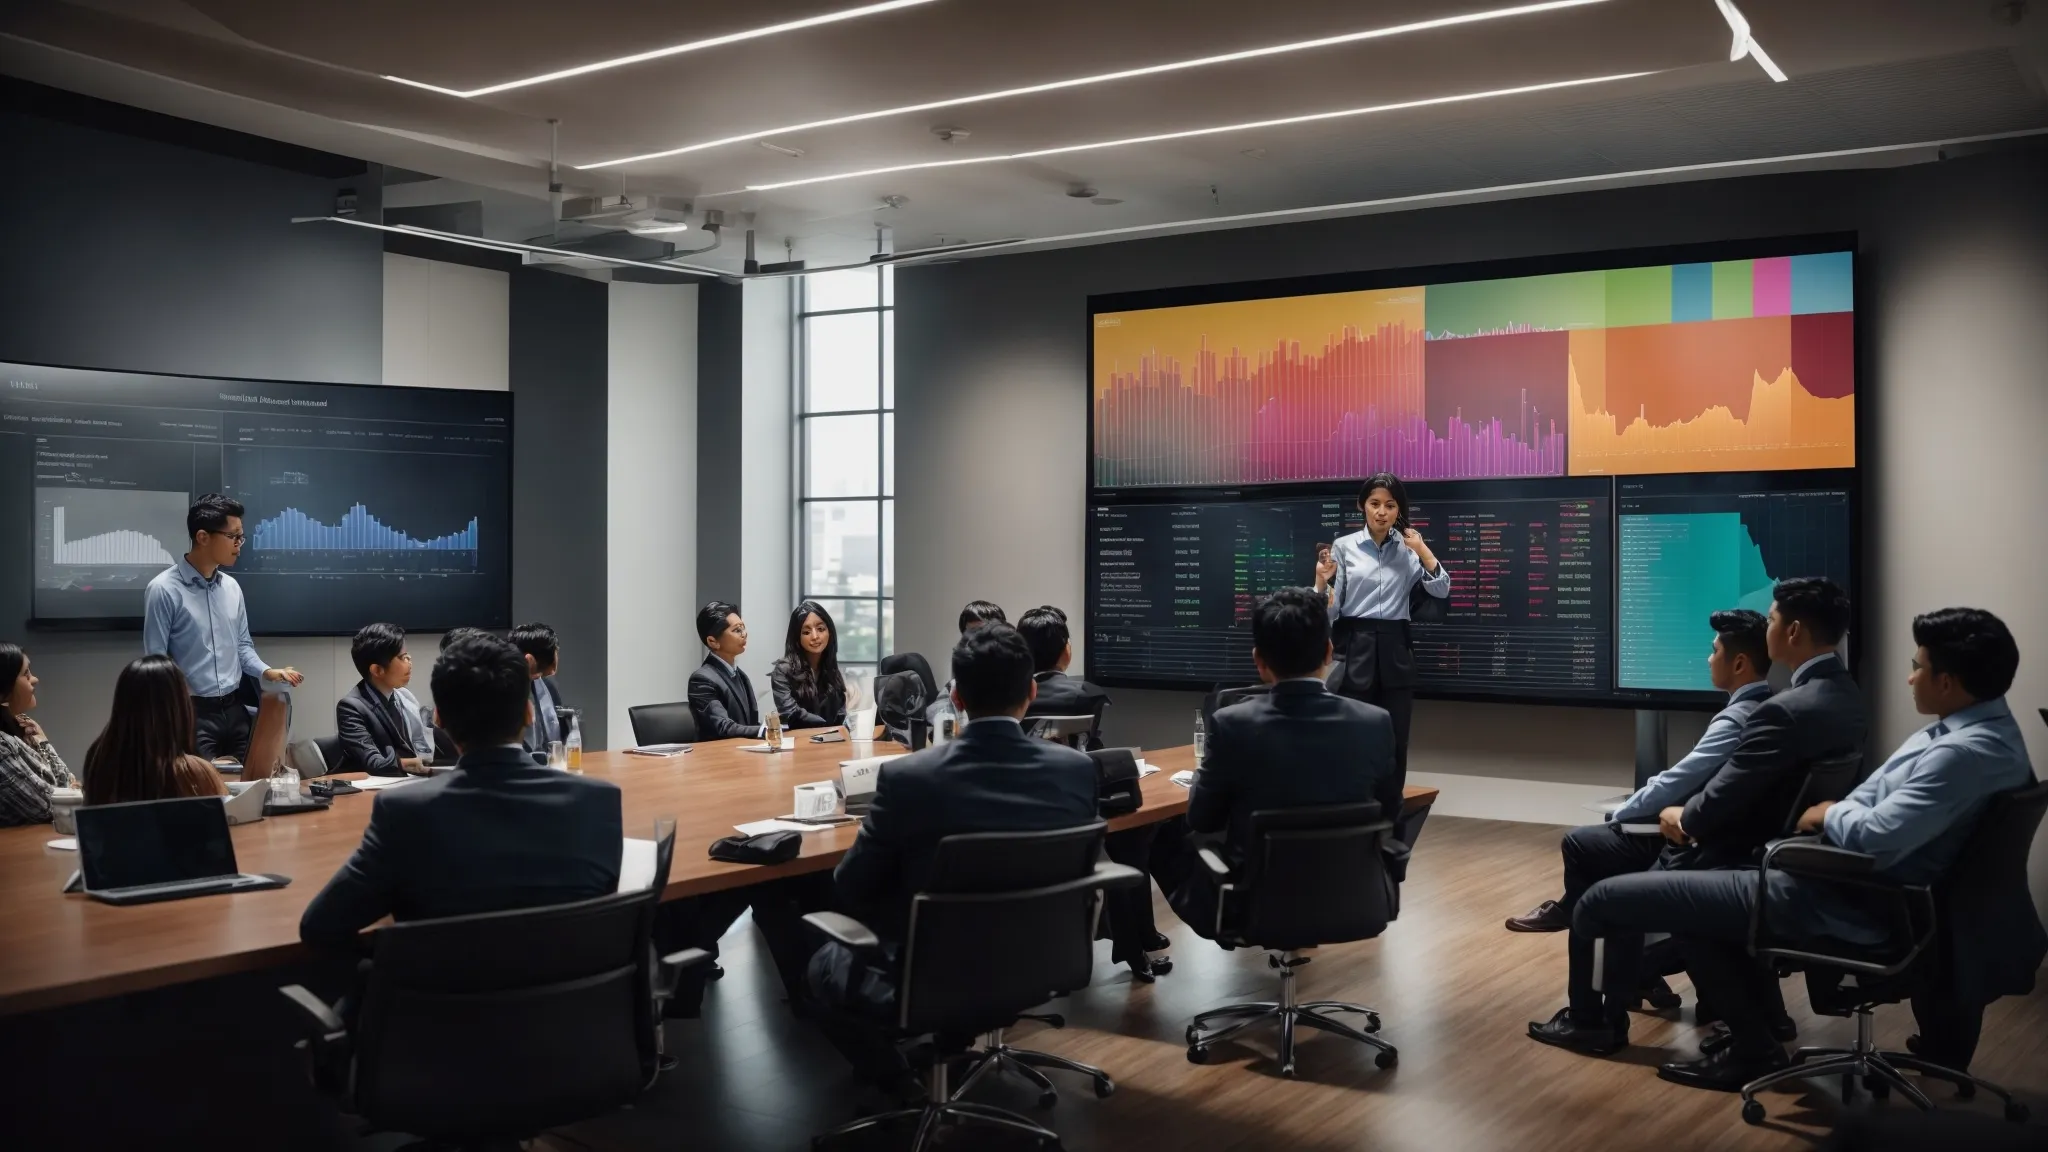 a professional conference room with a large screen displaying colorful graphs and charts while a digital marketer presents to a group of attentive employees.